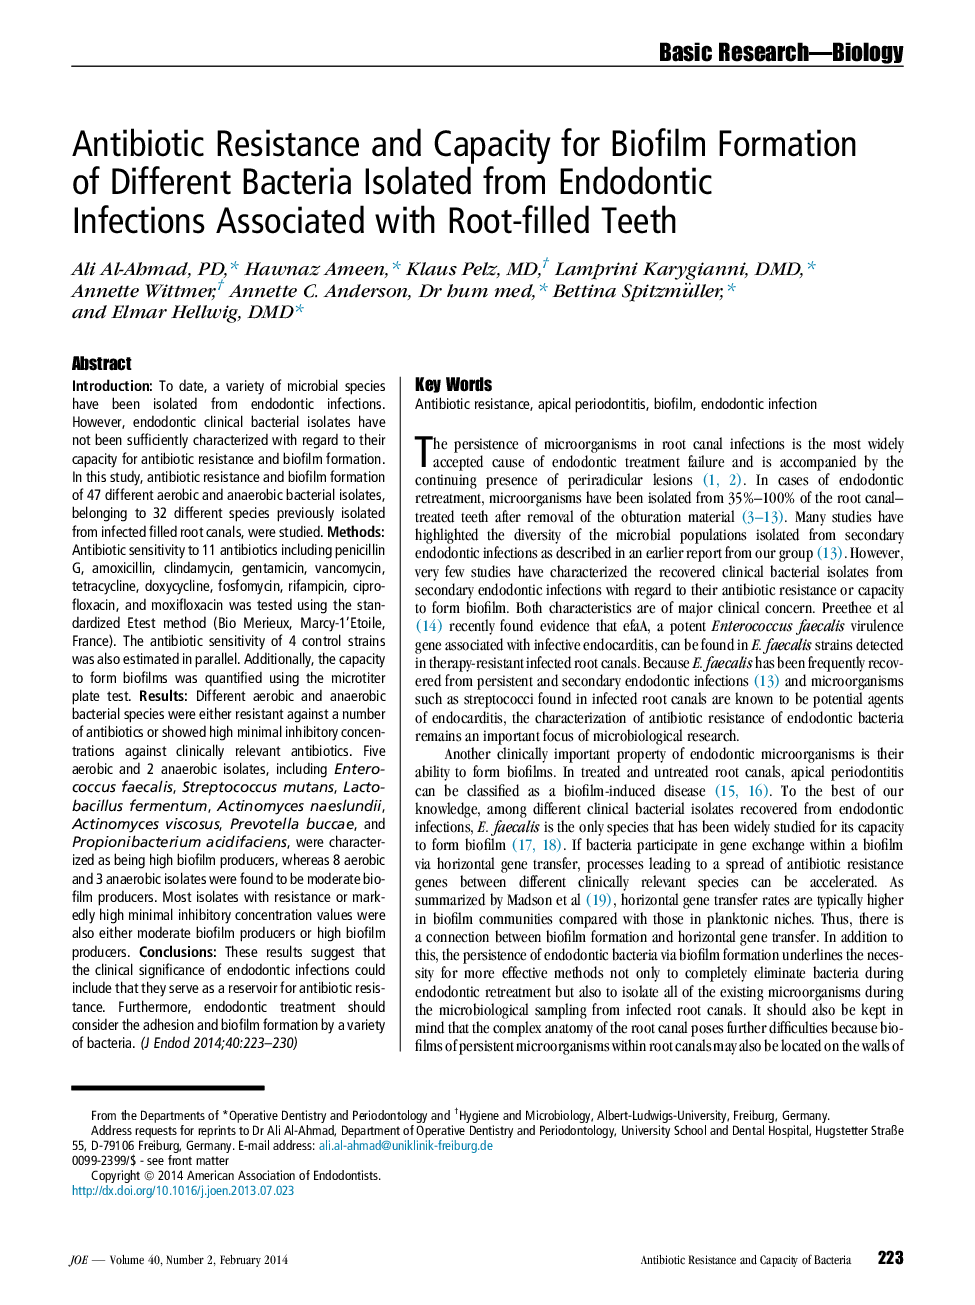 Antibiotic Resistance and Capacity for Biofilm Formation of Different Bacteria Isolated from Endodontic Infections Associated with Root-filled Teeth